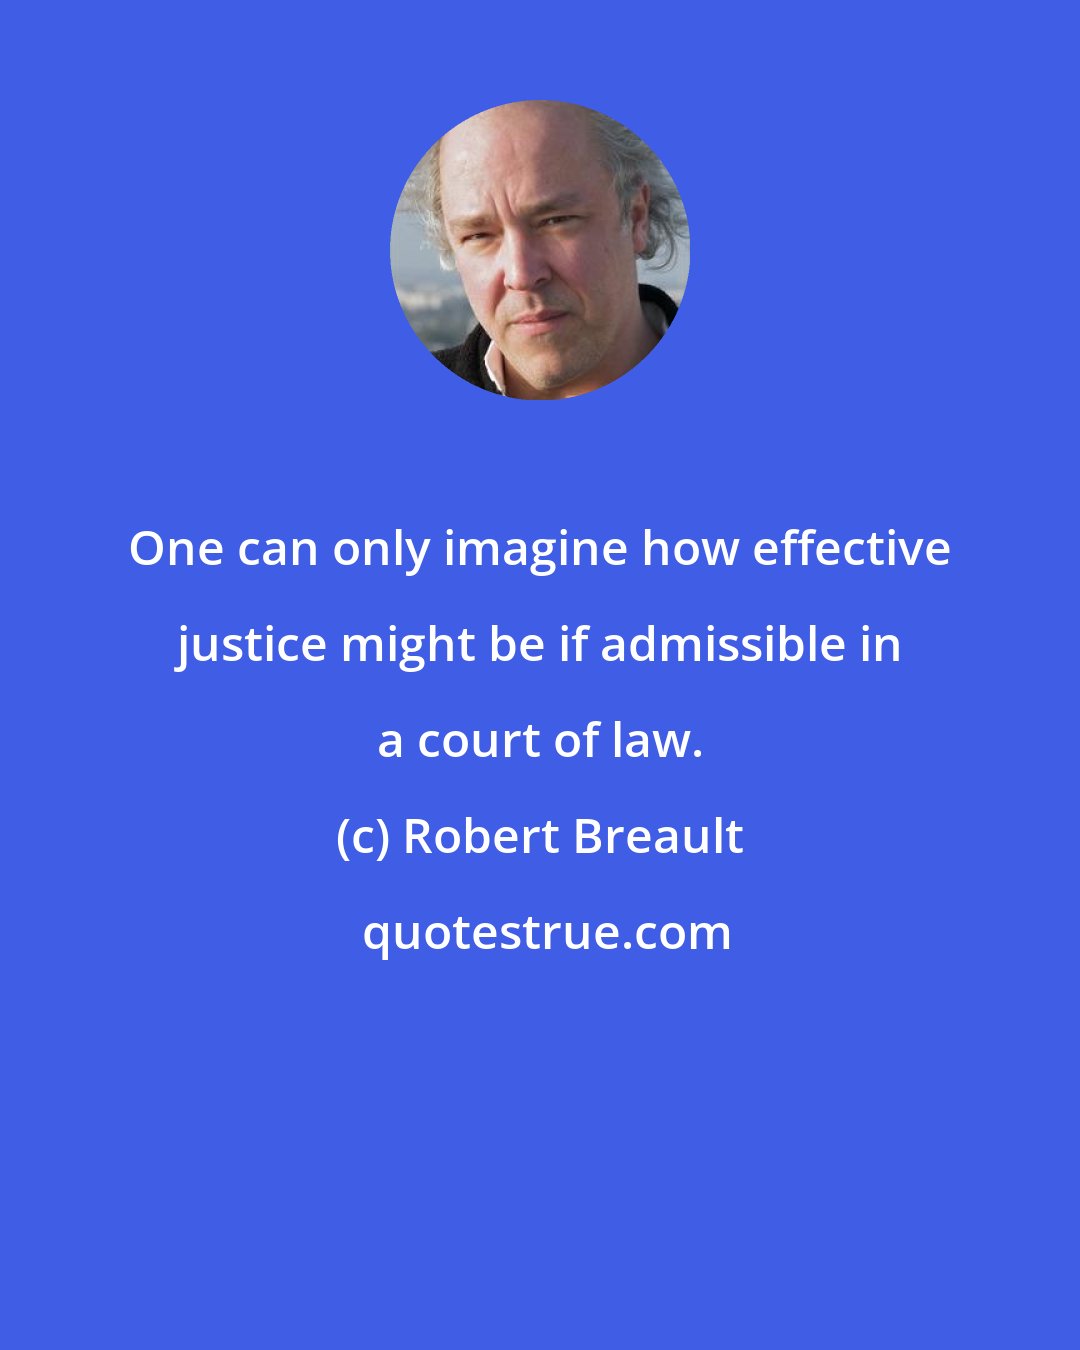 Robert Breault: One can only imagine how effective justice might be if admissible in a court of law.